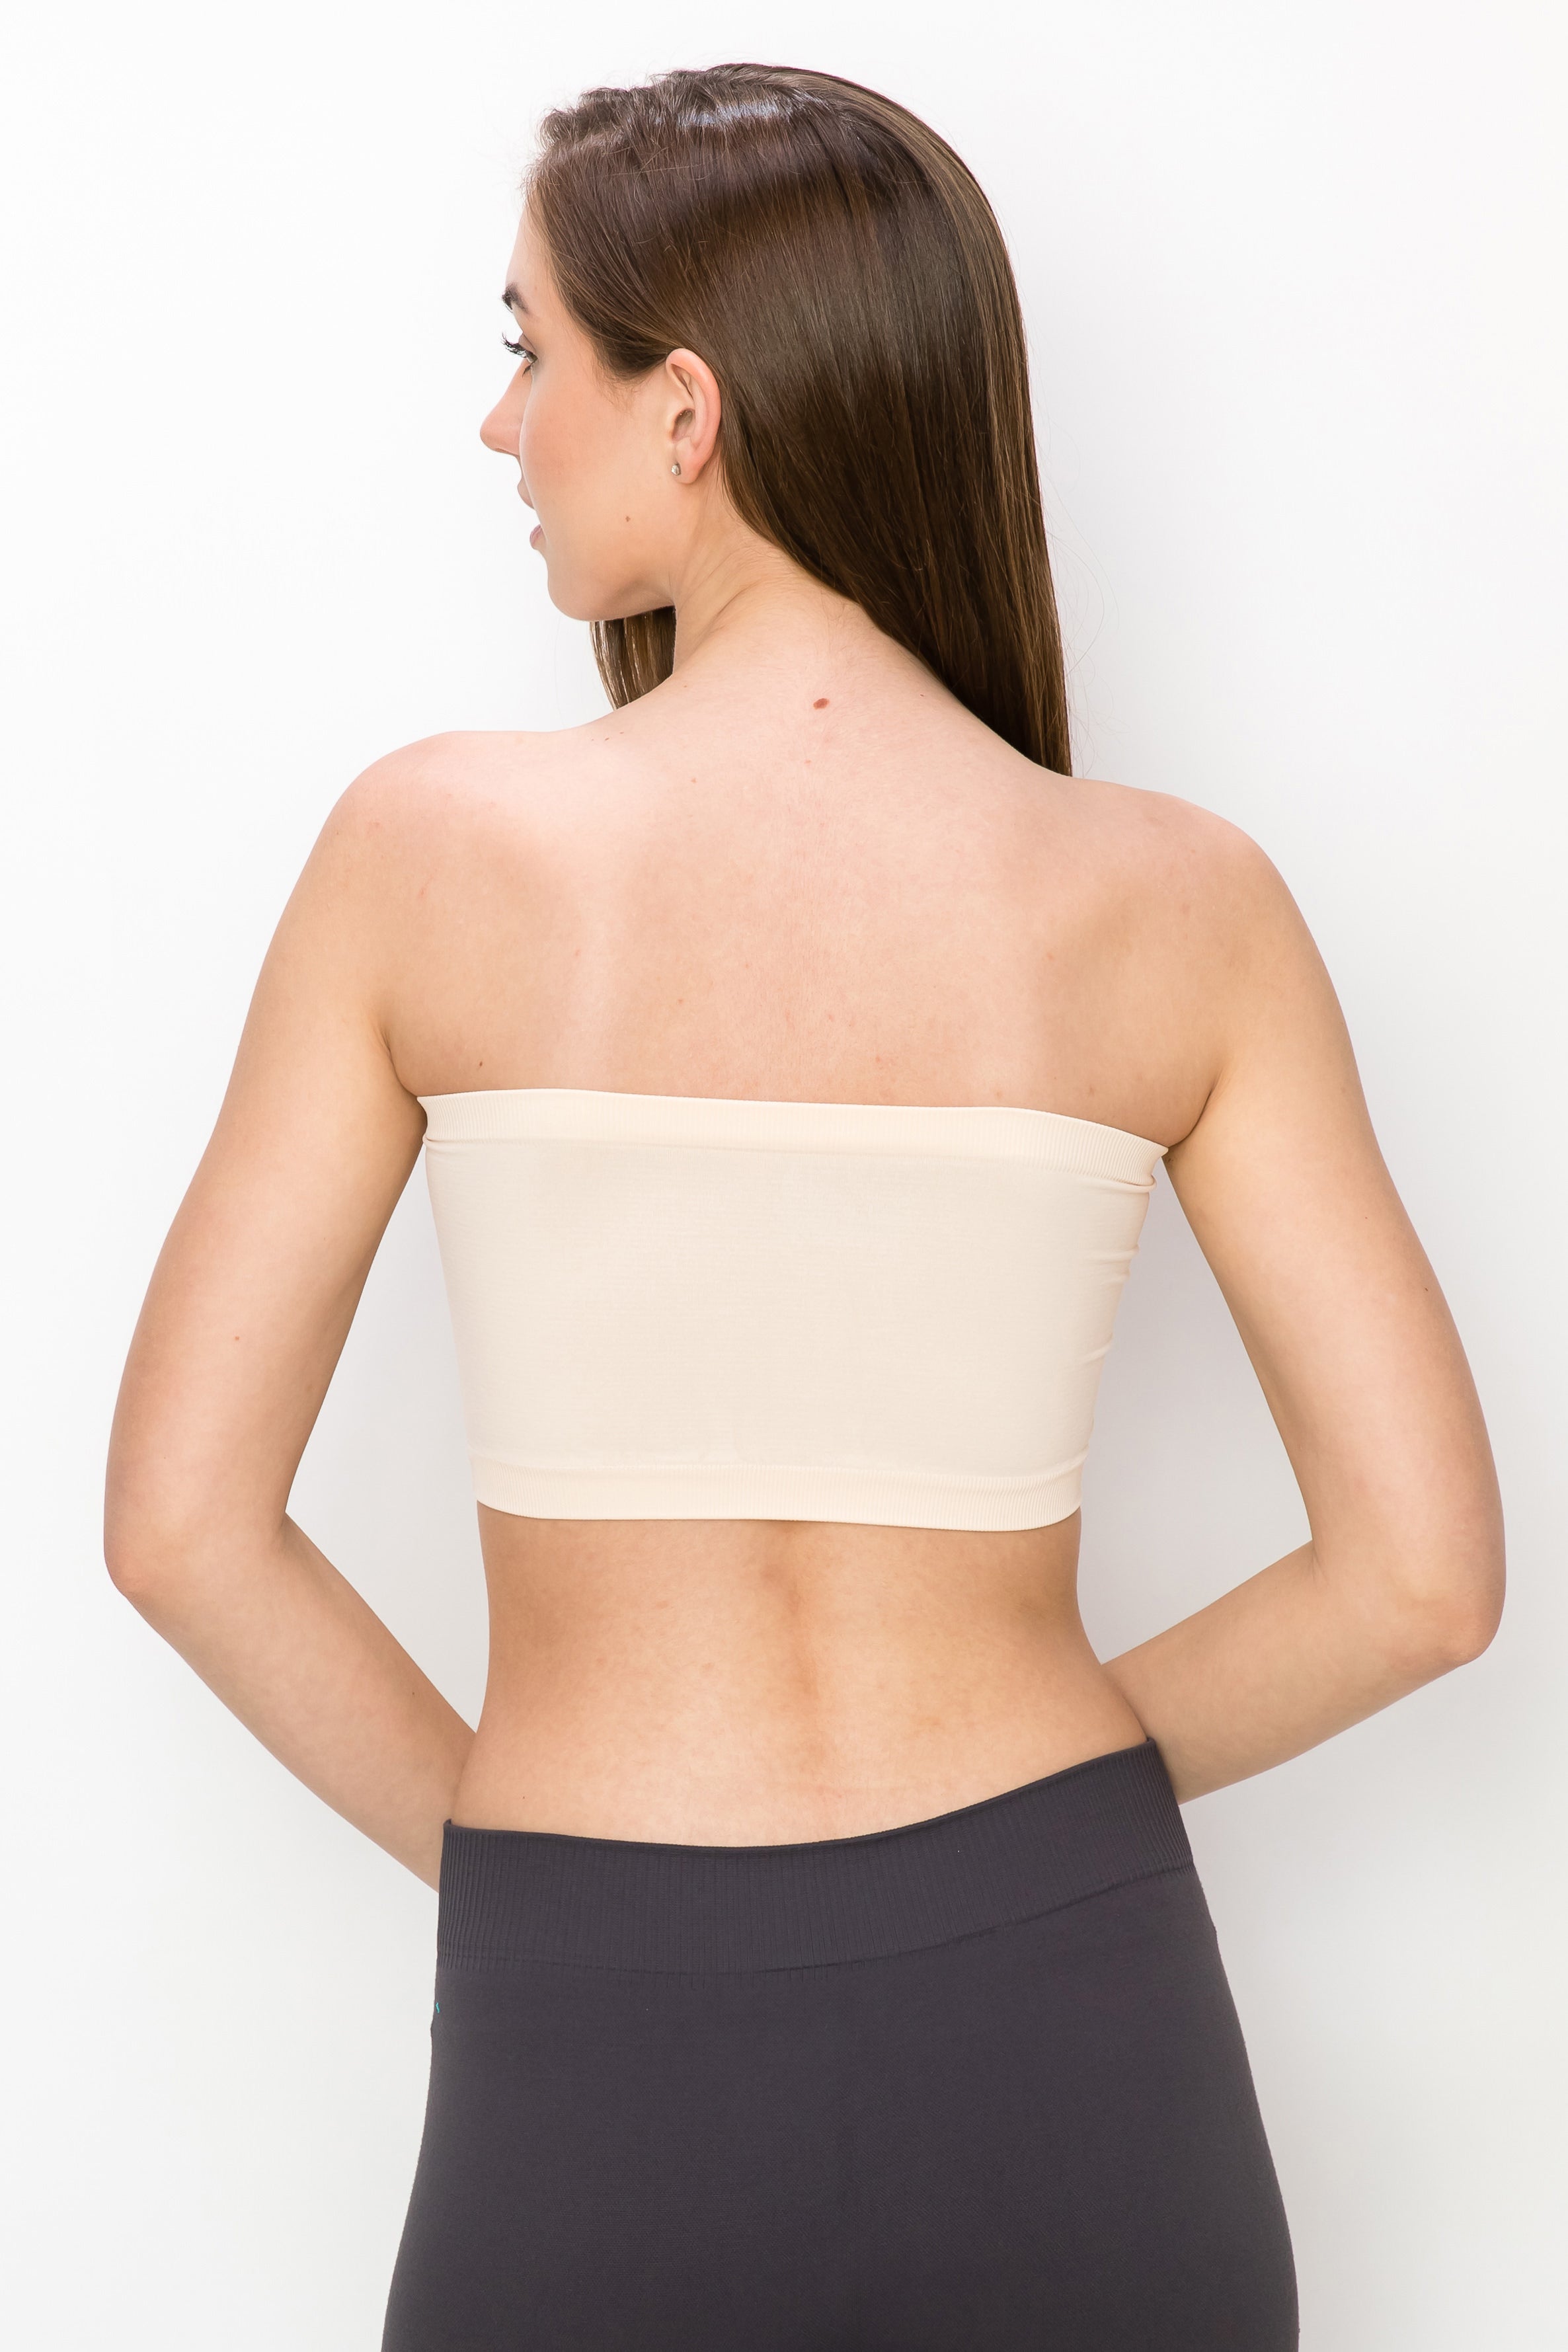 Tube Tops, Bandeau & Strapless Tops